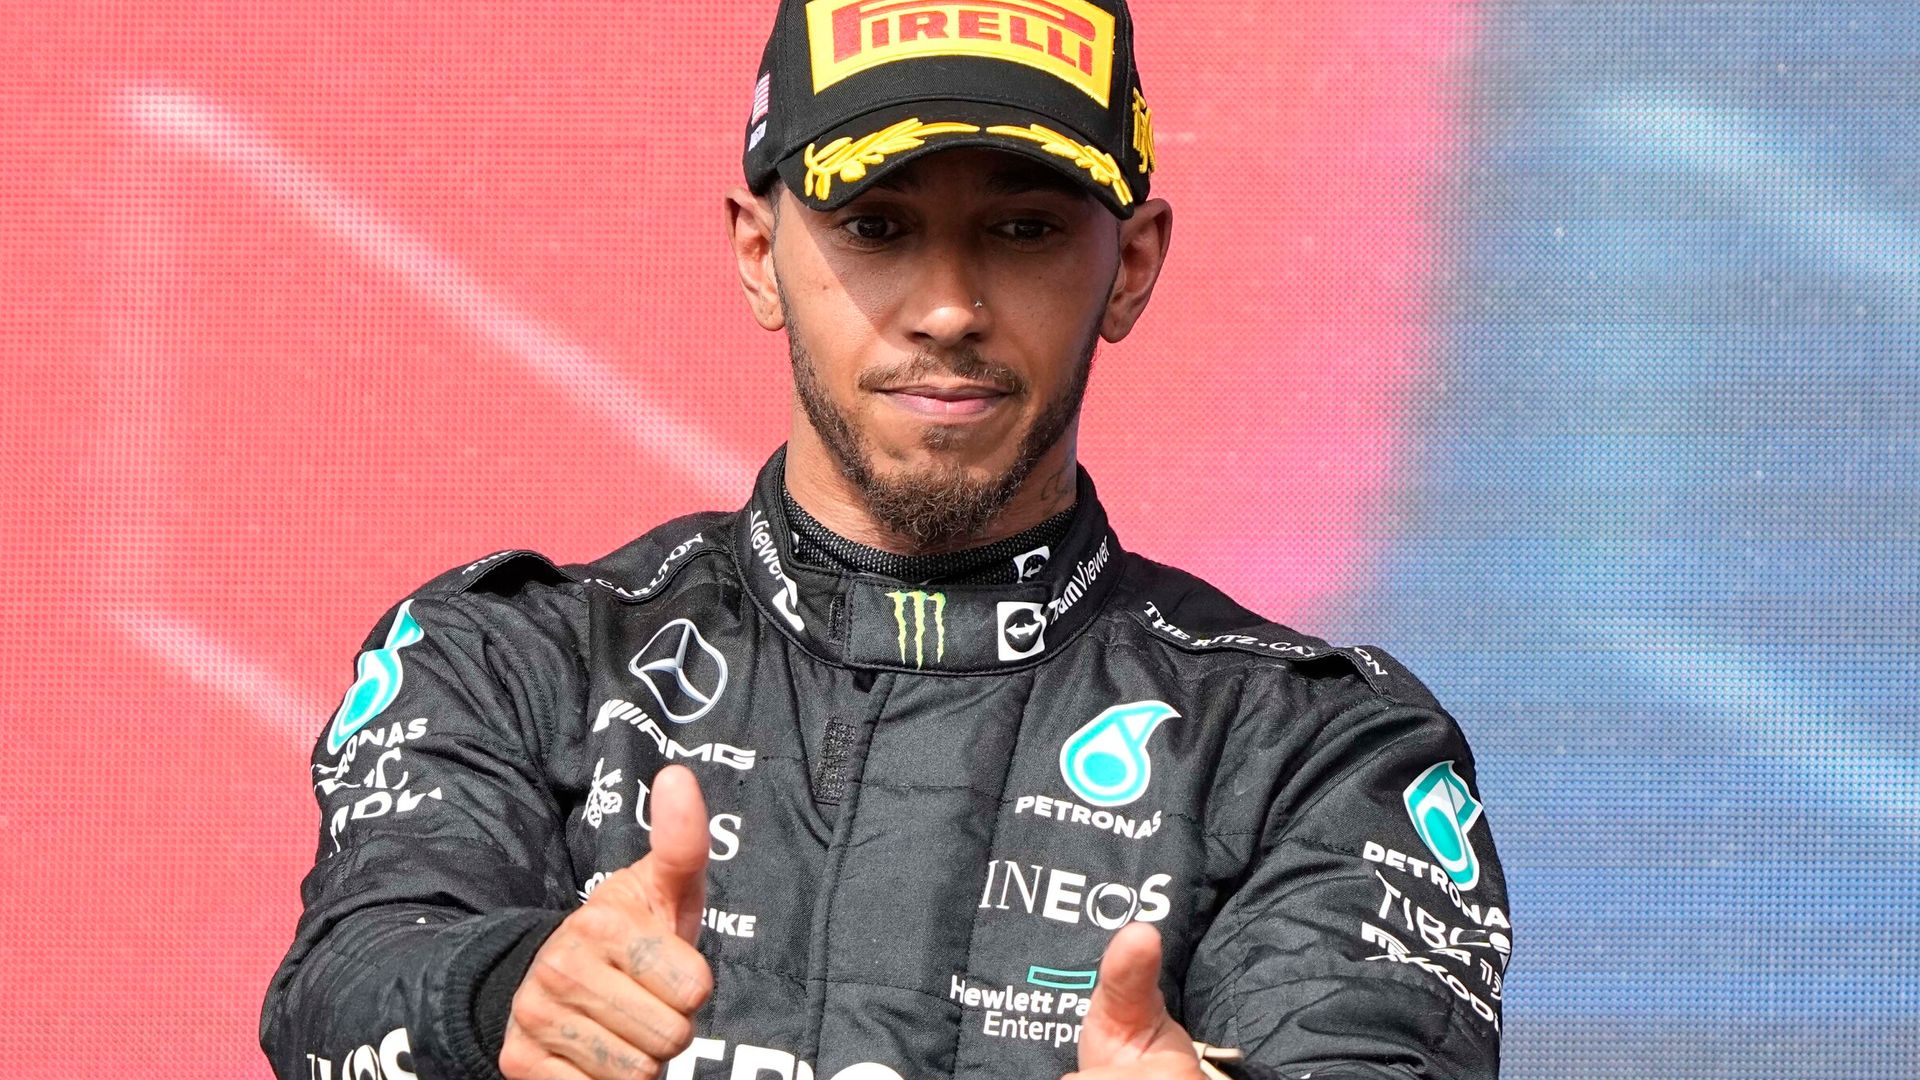 Hamilton defiant after agonising US GP | 'I'm still here... I can take Merc to the top'